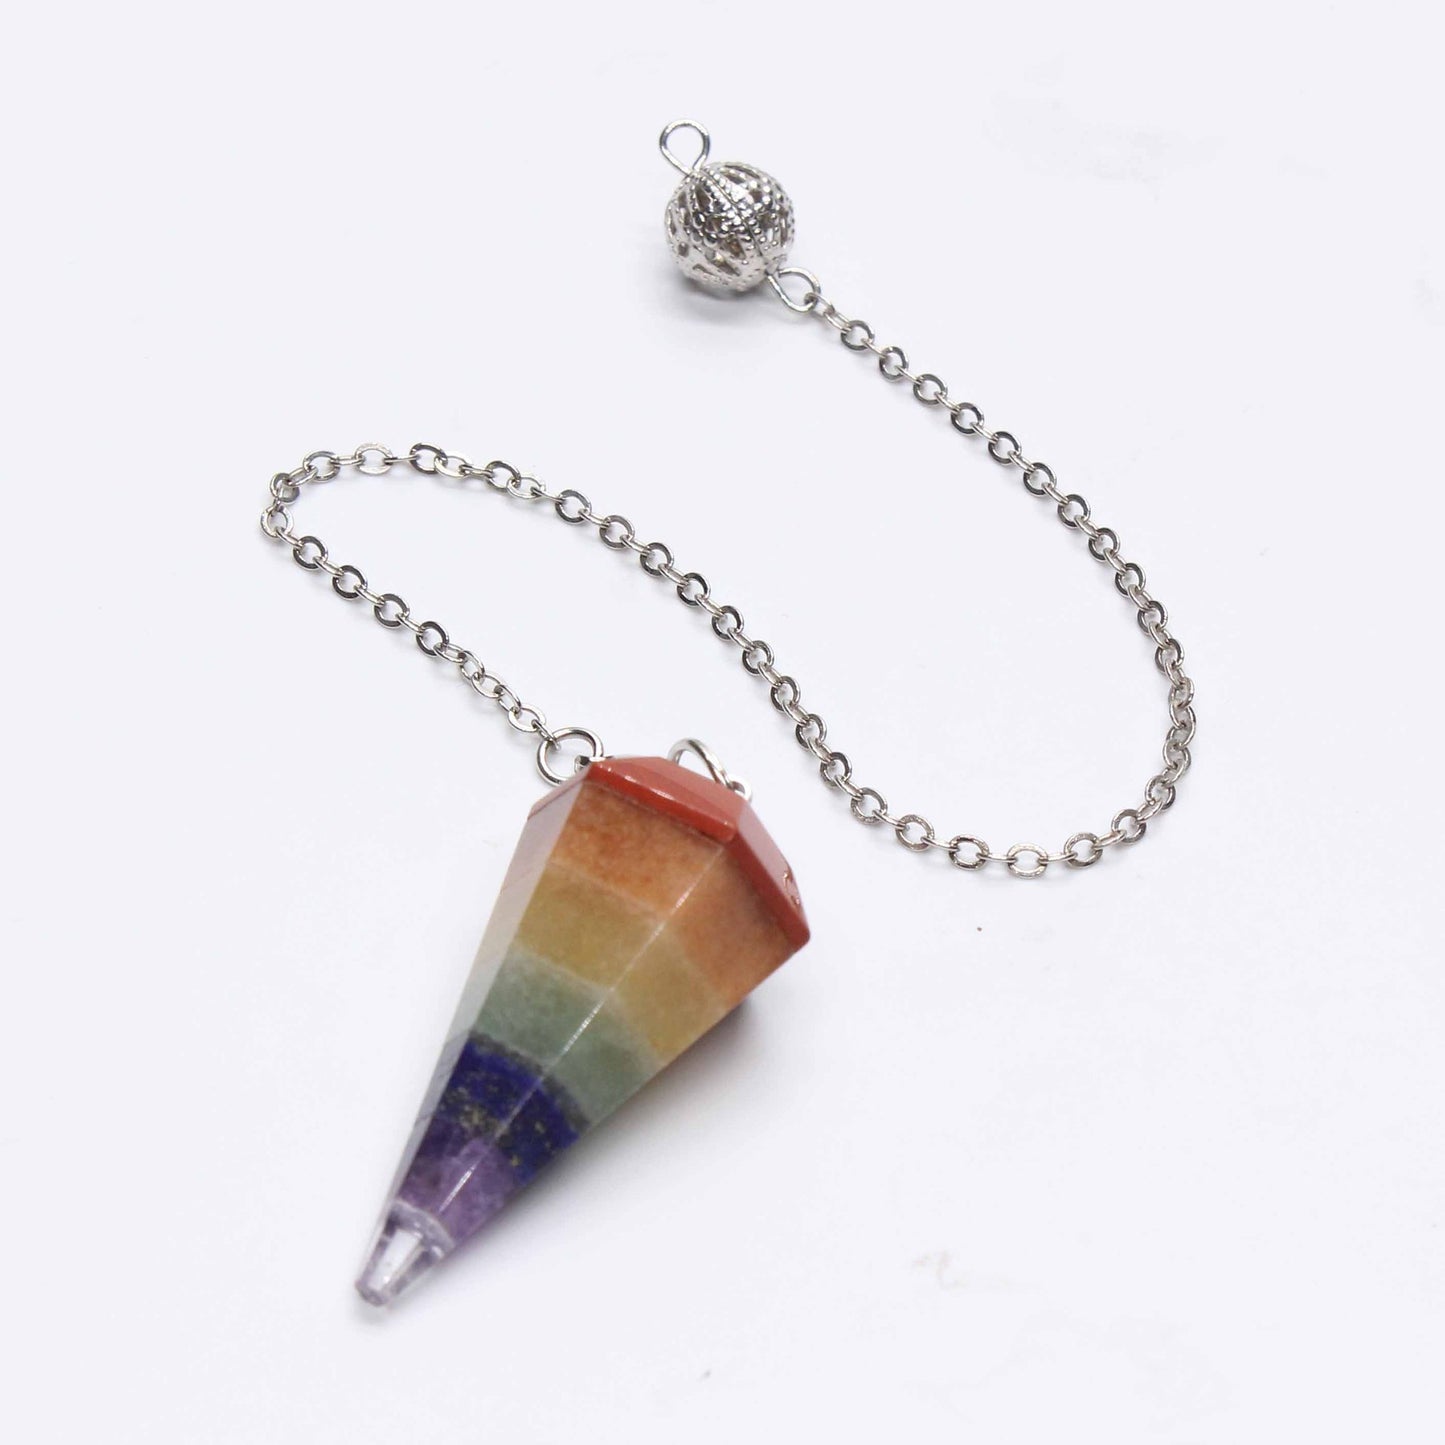 Crystal Pendulums 11 stones to Pick from